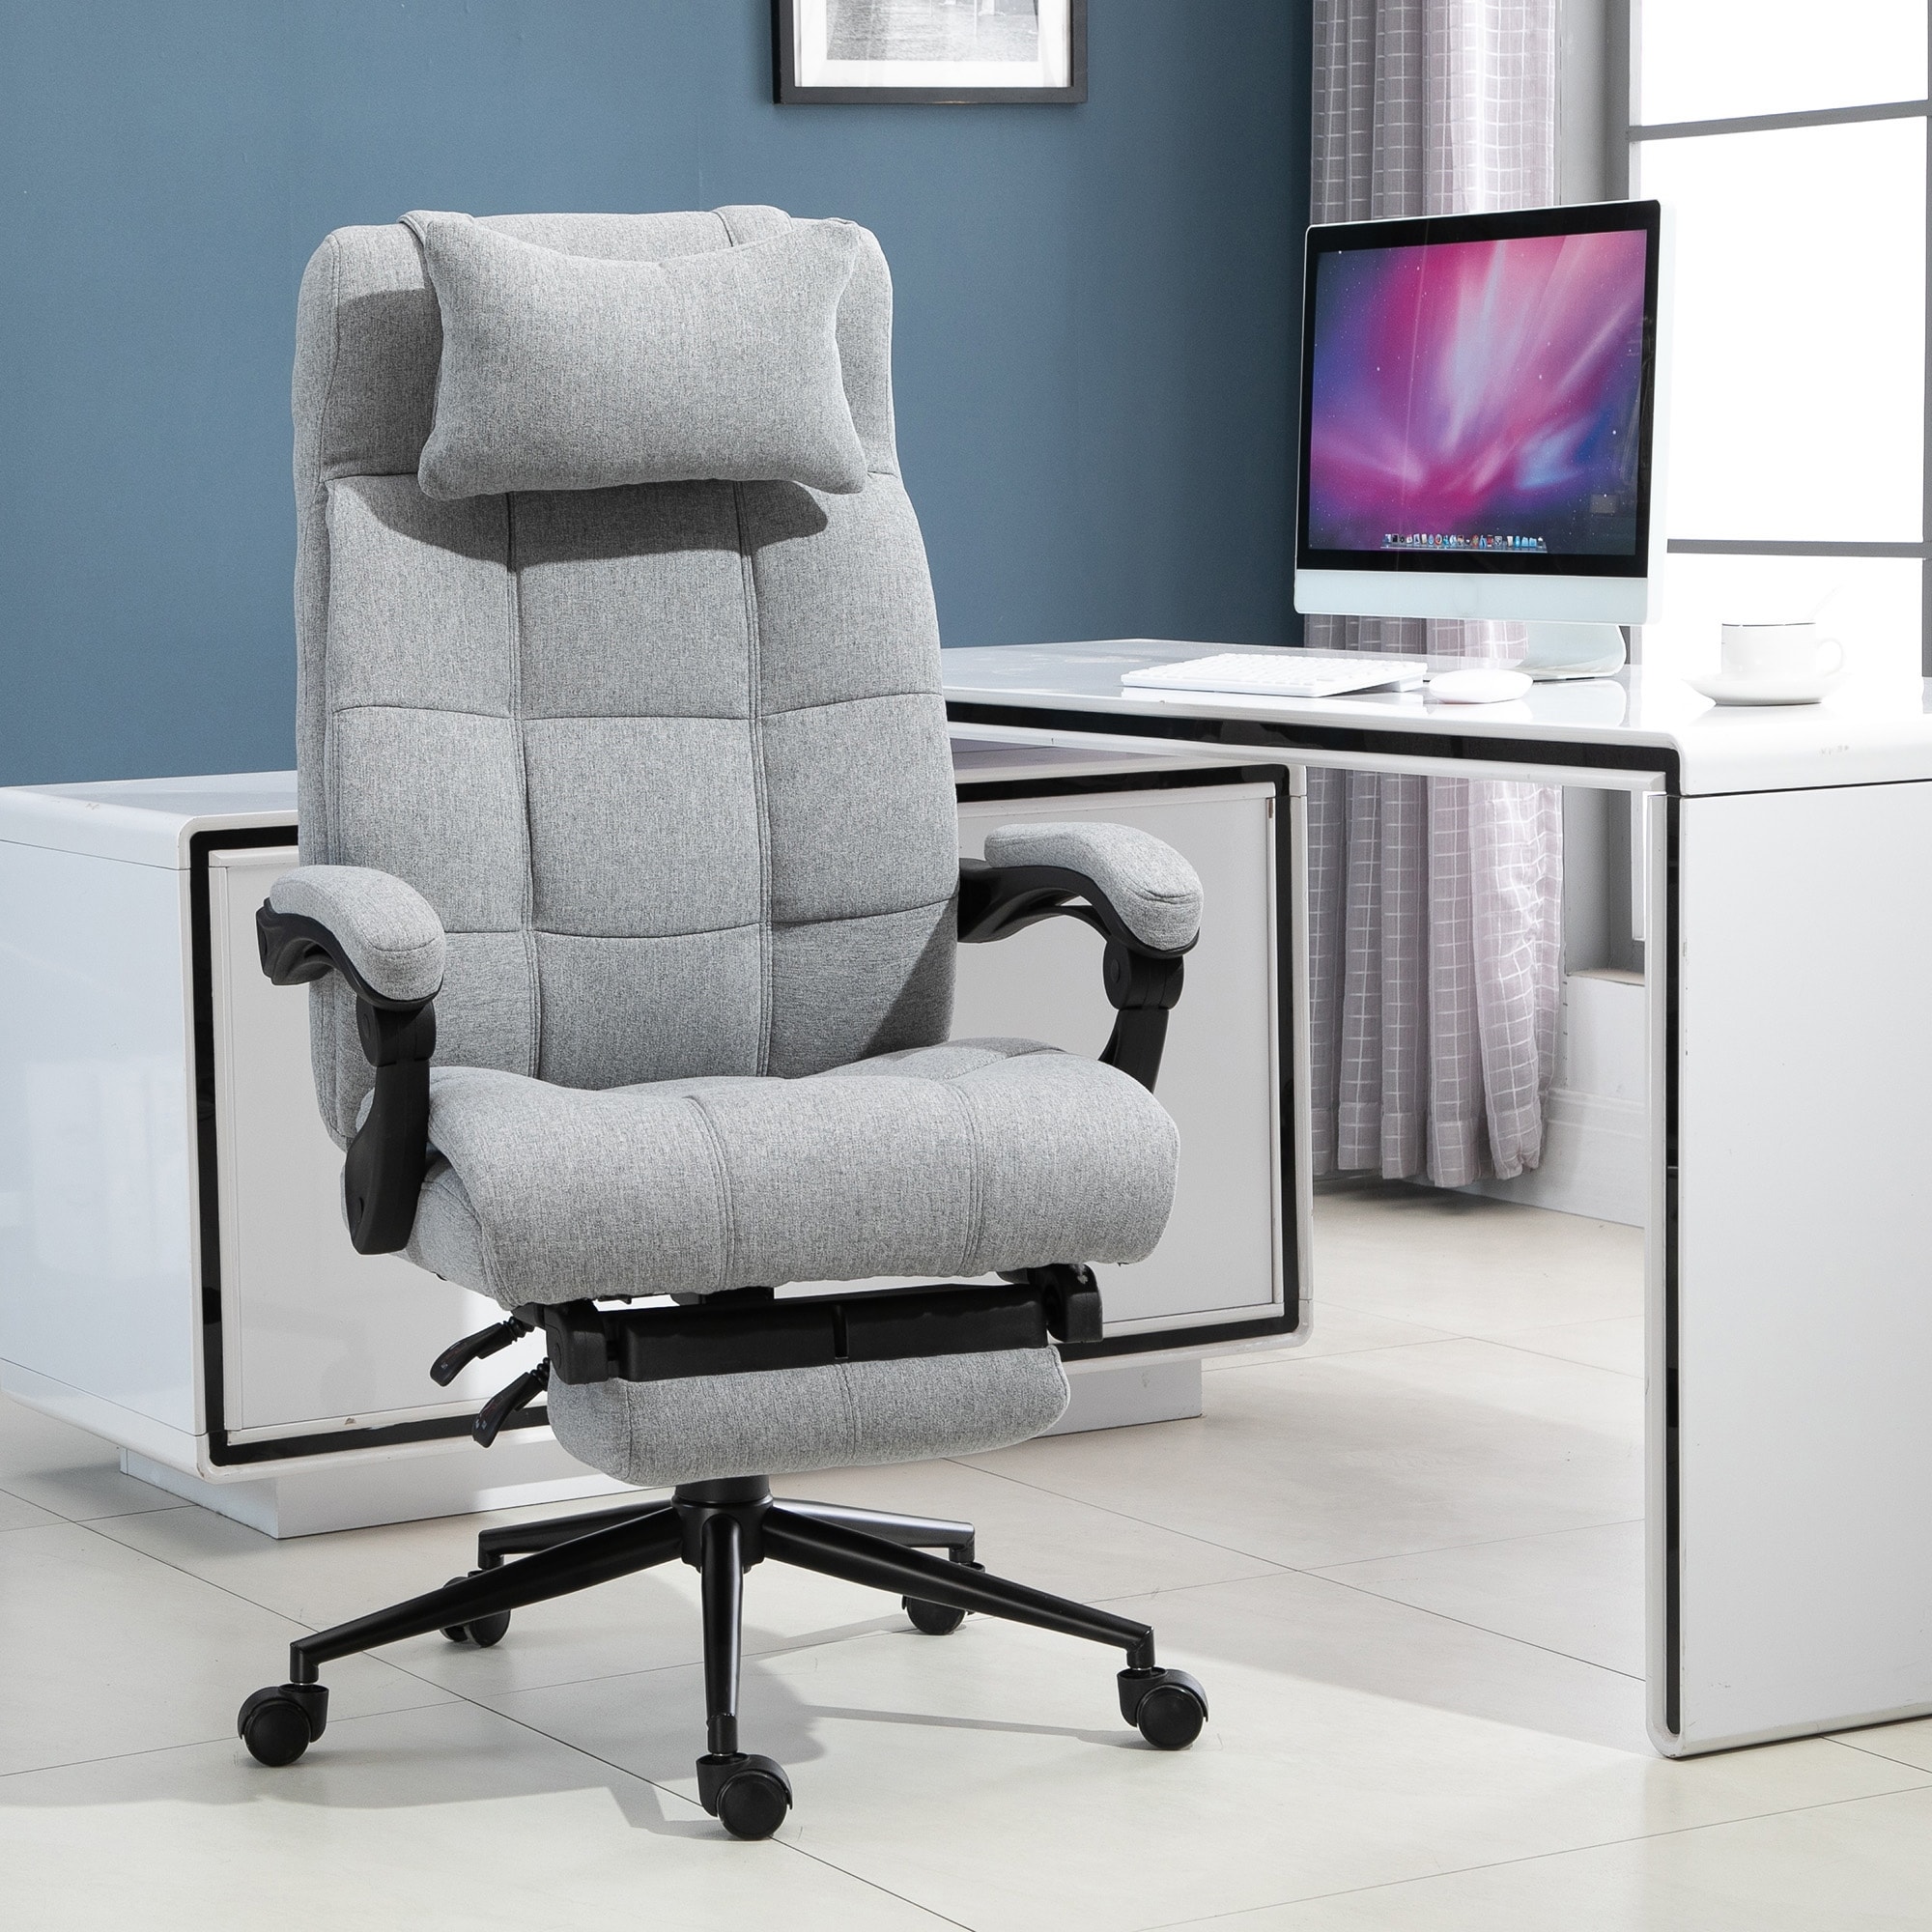 https://ak1.ostkcdn.com/images/products/is/images/direct/339f5e033bb03add0c6ee1e8cbd3e4475941d3b6/Vinsetto-Executive-Linen-Fabric-Home-Office-Chair-with-Retractable-Footrest%2C-Headrest%2C-and-Lumbar-Support.jpg